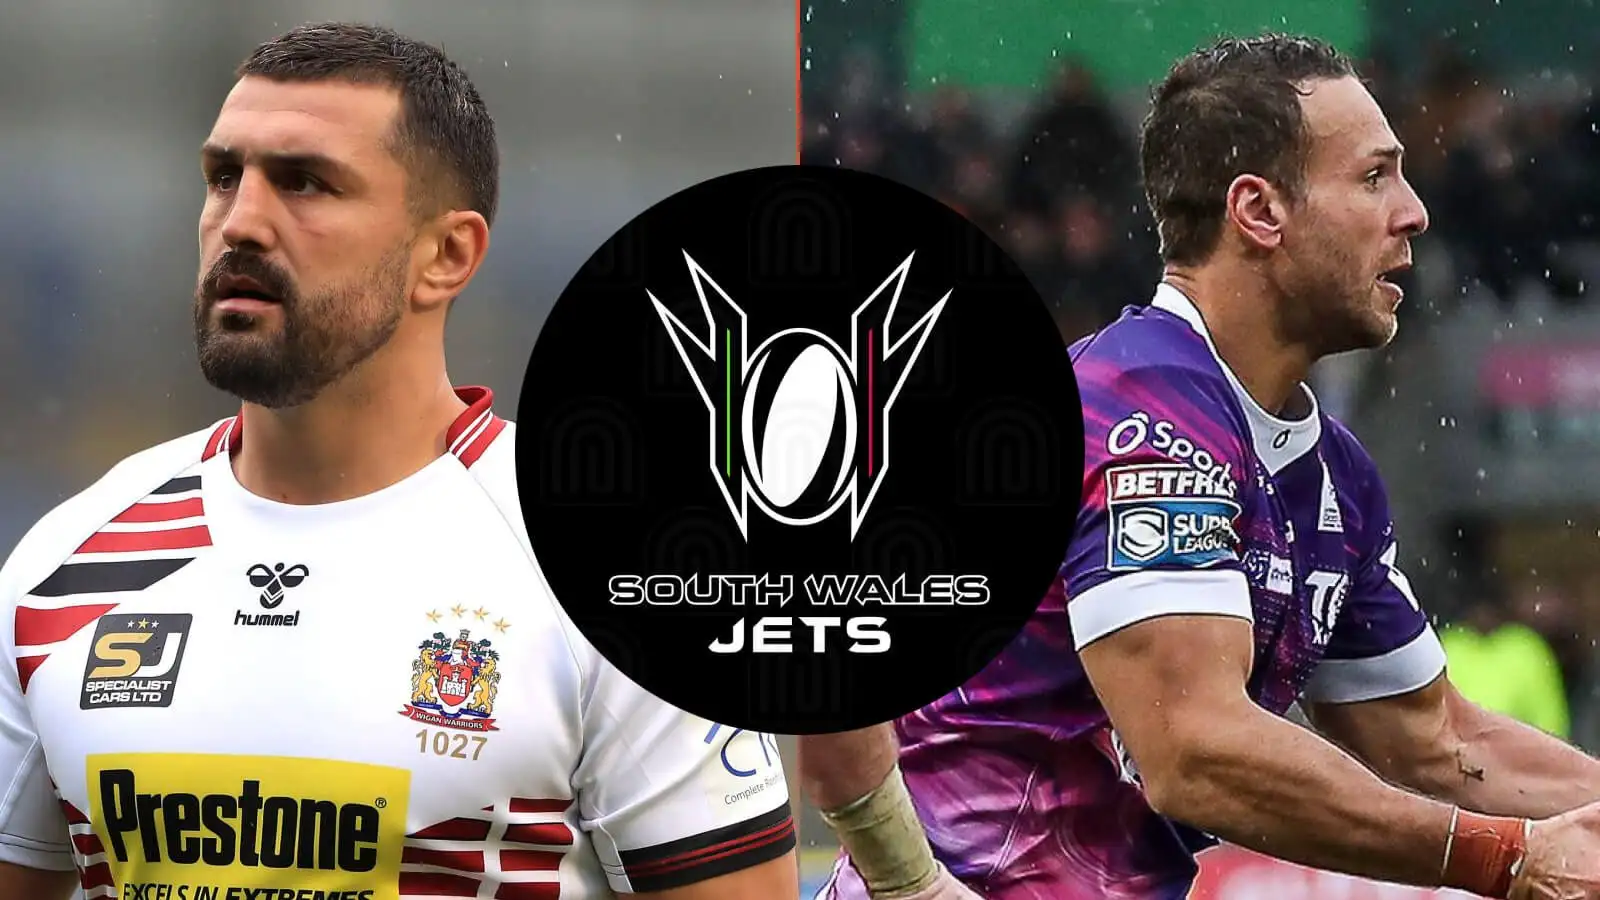 Former Super League duo helping Welsh club prepare for first-ever Challenge Cup appearance